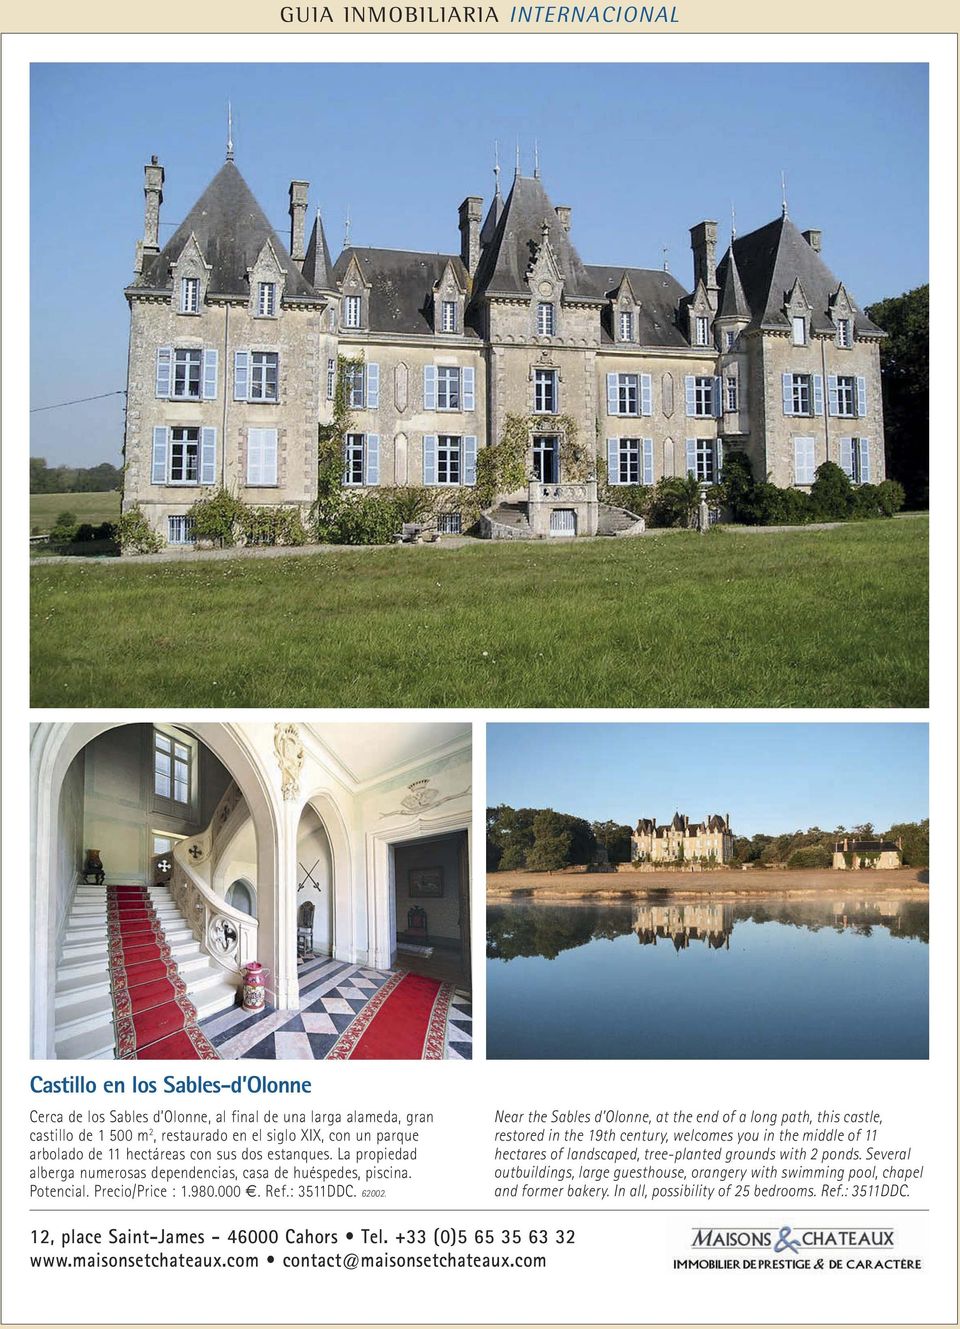 Near the Sables d Olonne, at the end of a long path, this castle, restored in the 19th century, welcomes you in the middle of 11 hectares of landscaped, tree-planted grounds with 2 ponds.